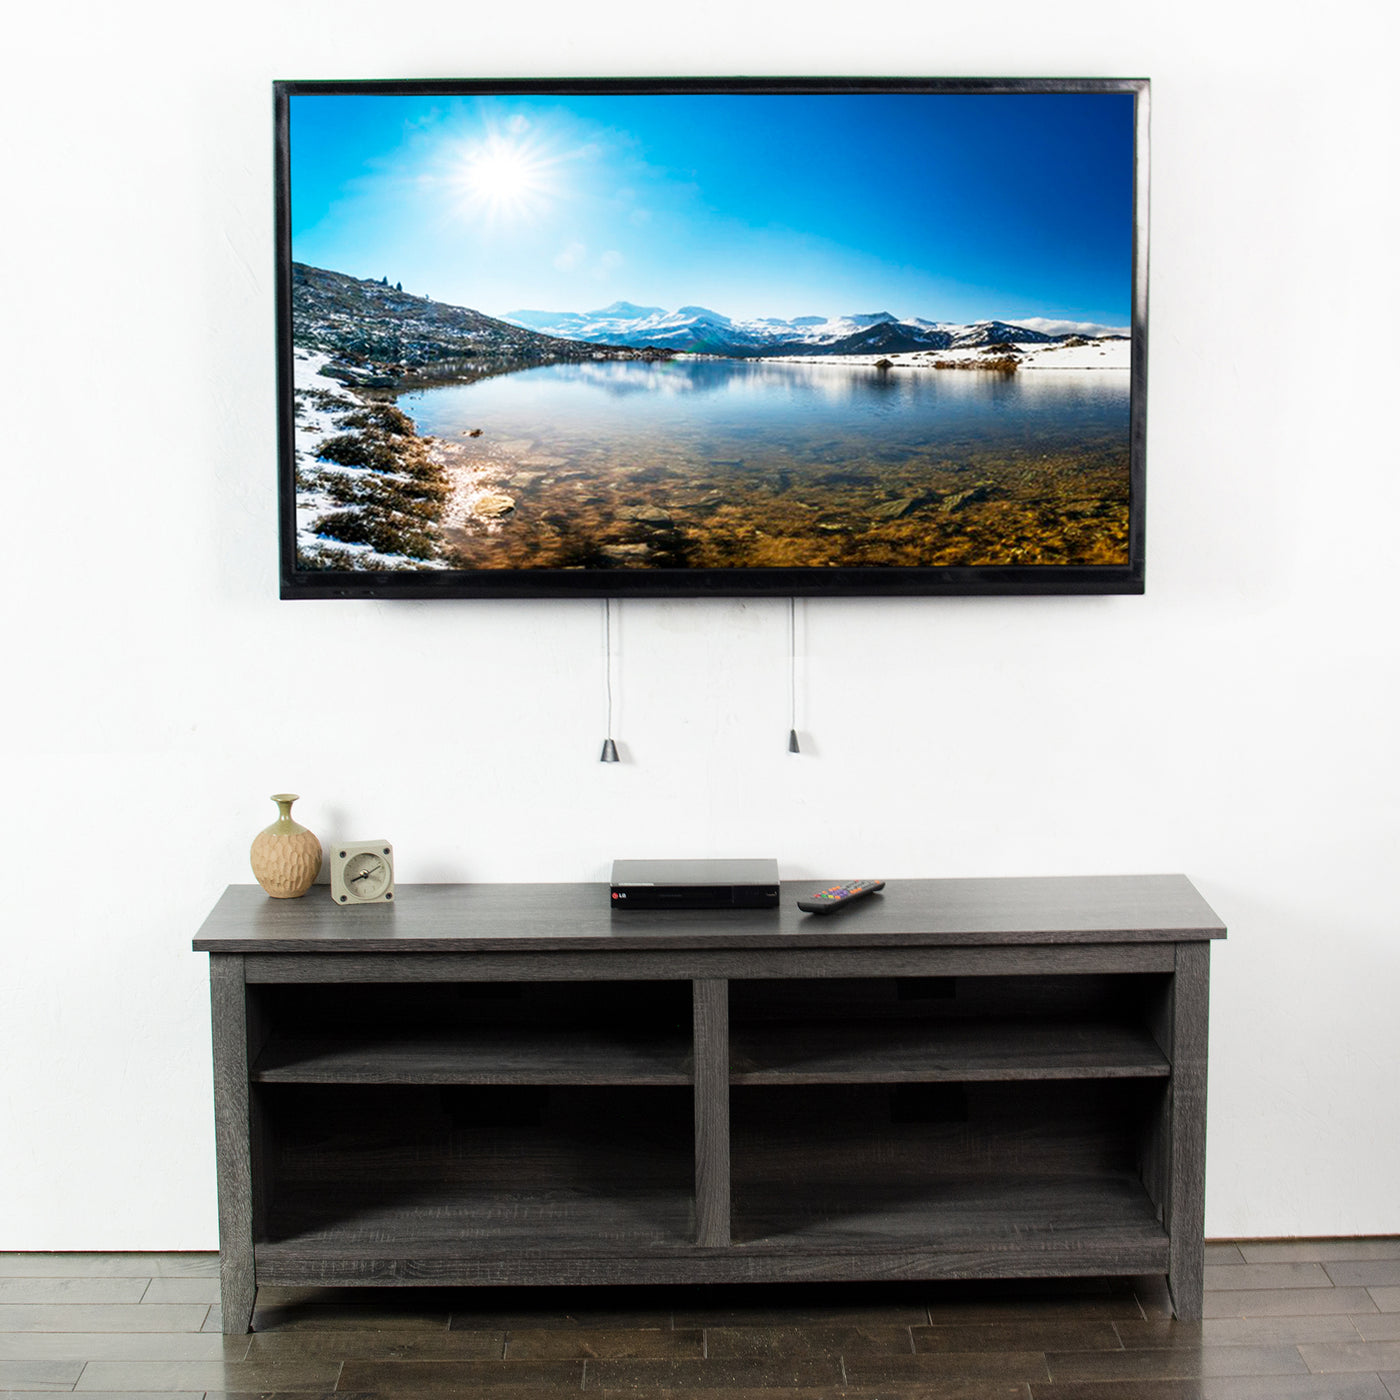 Extra large TV mount securely supporting a larger screen in a living space.